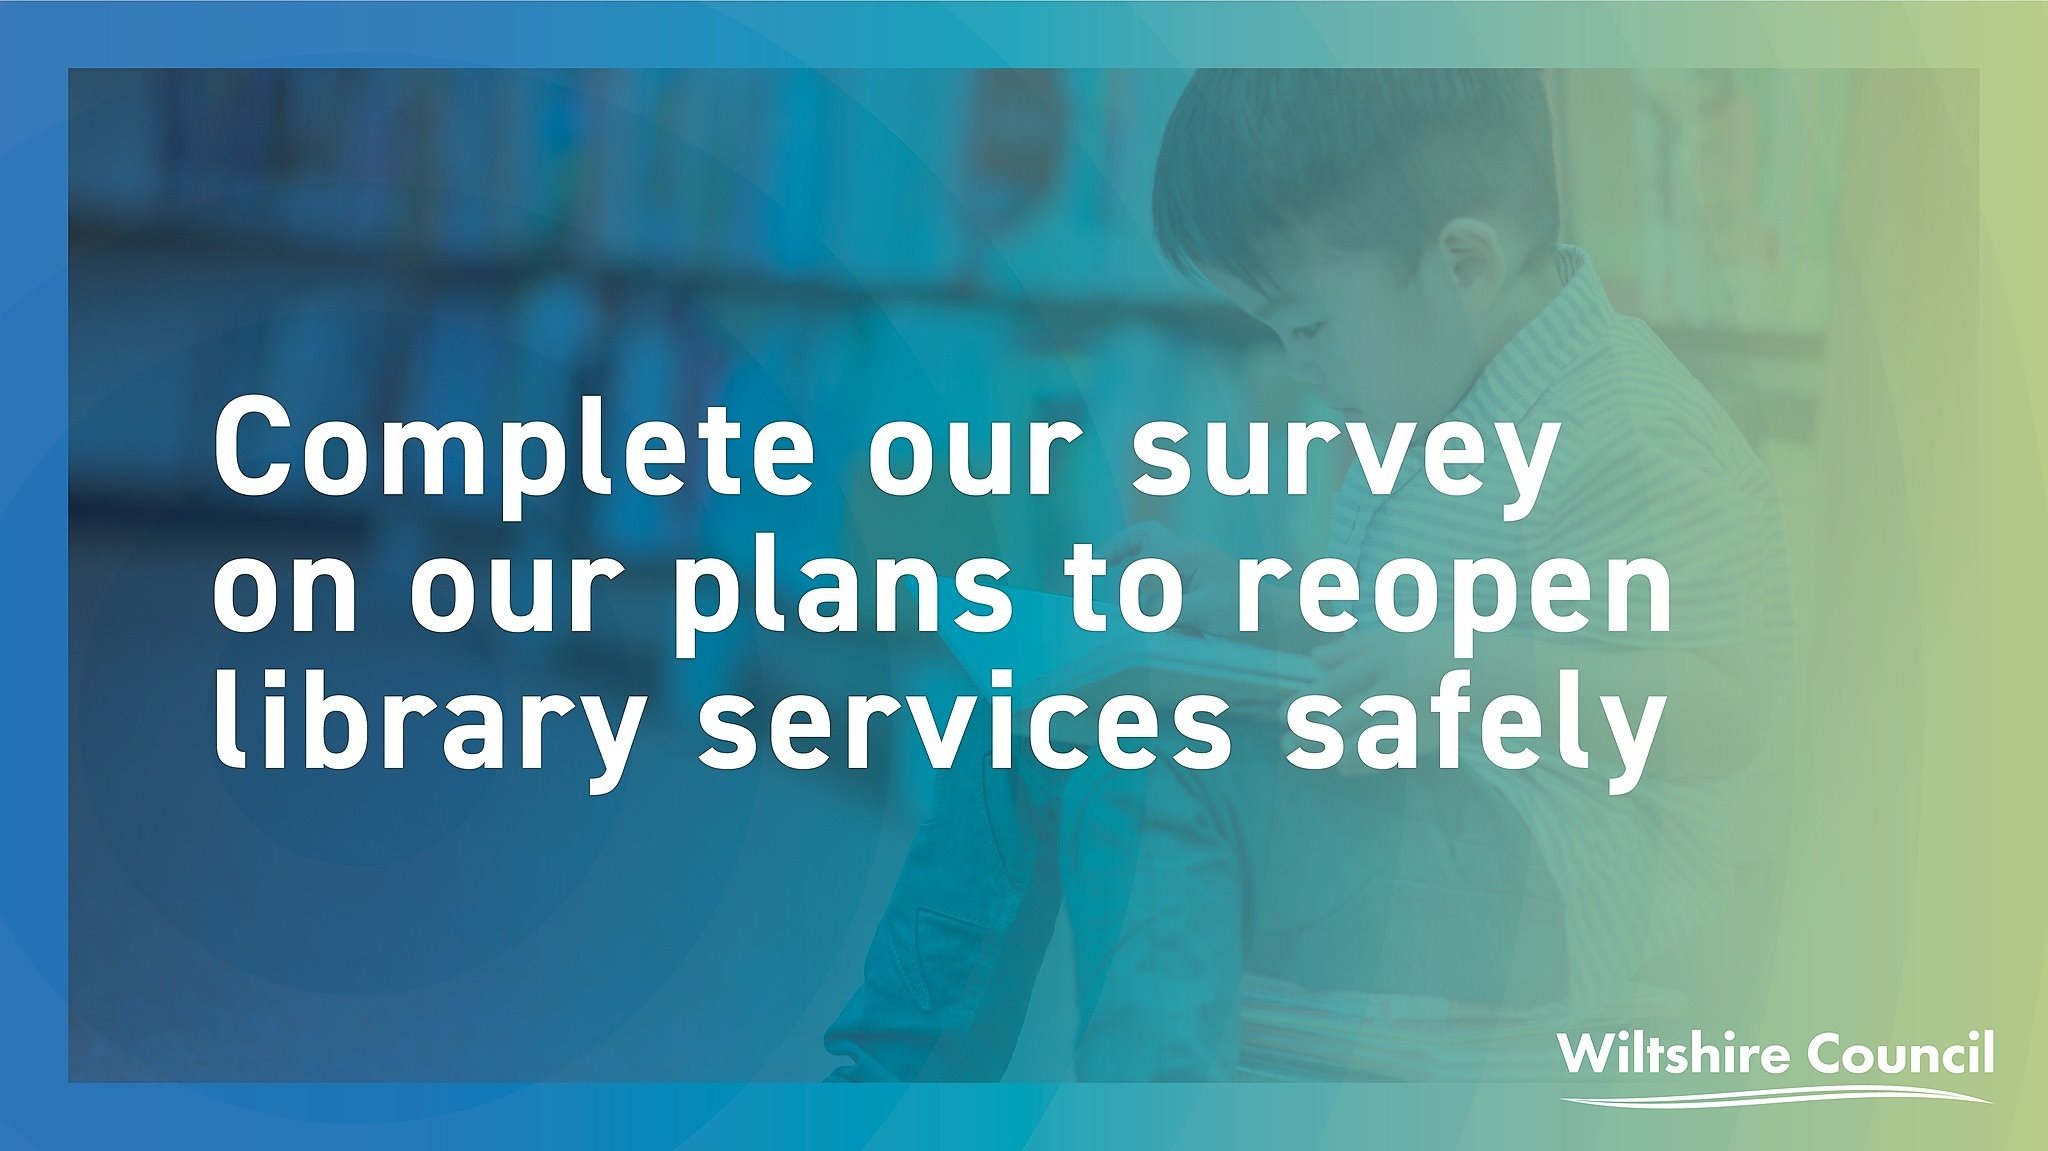 WC complete our survey graphic